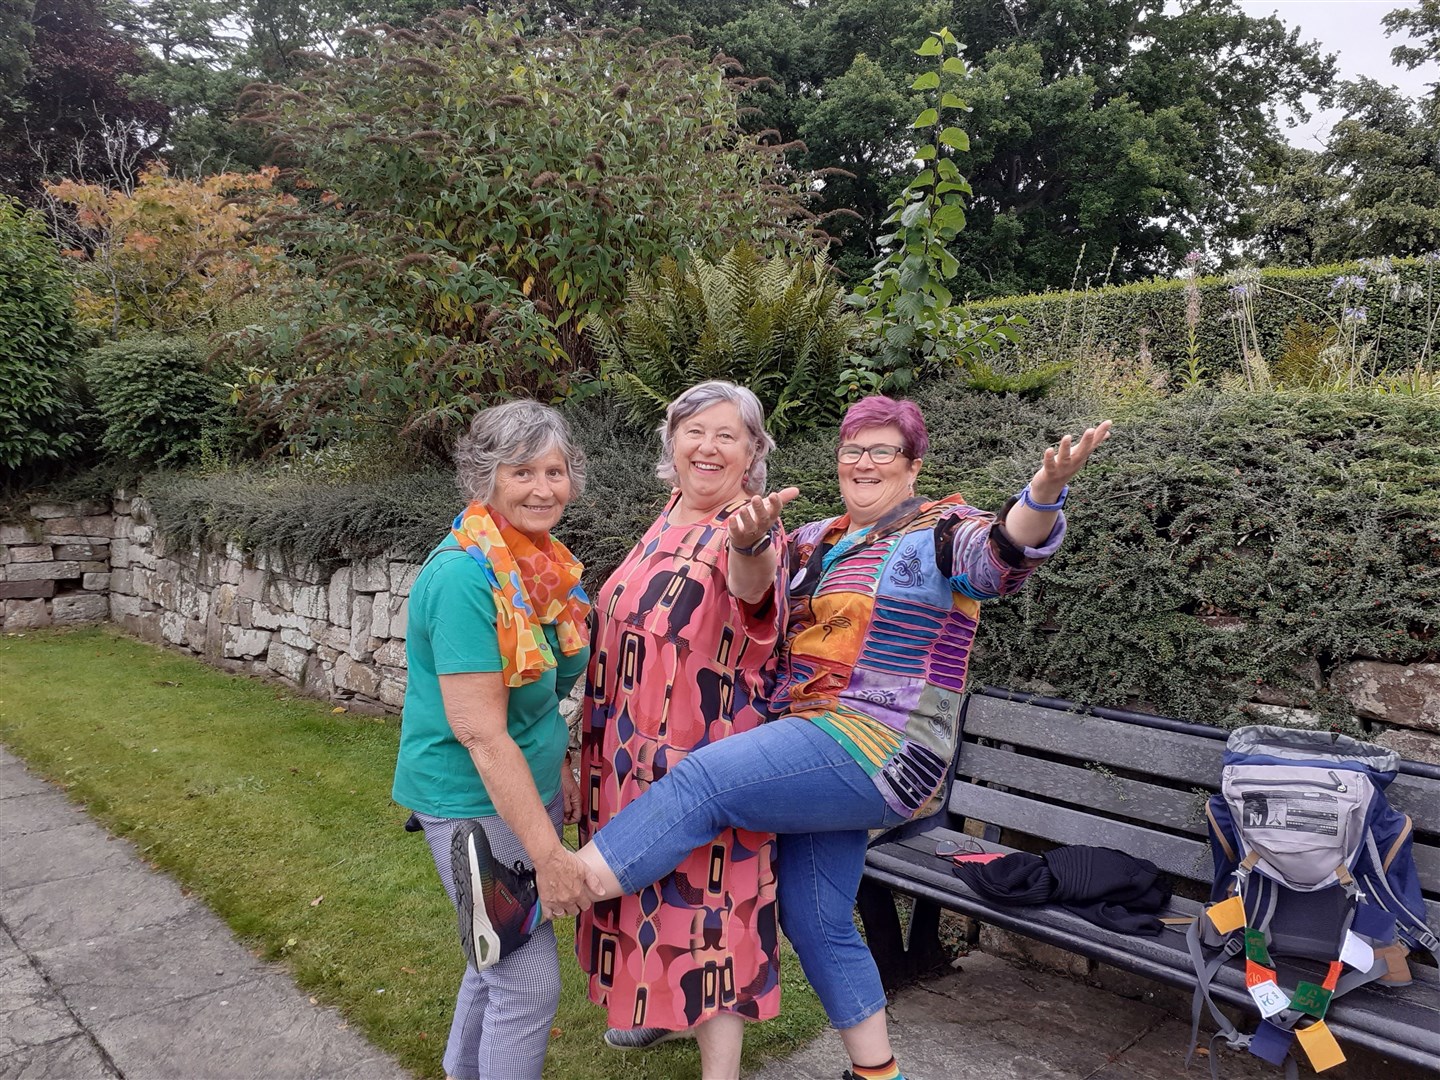 Lorna Cresswell, Jacqui Jones and Ruth Boardman, pictured back in September, announcing that the show would be returning to Elgin Town Hall this Spring.